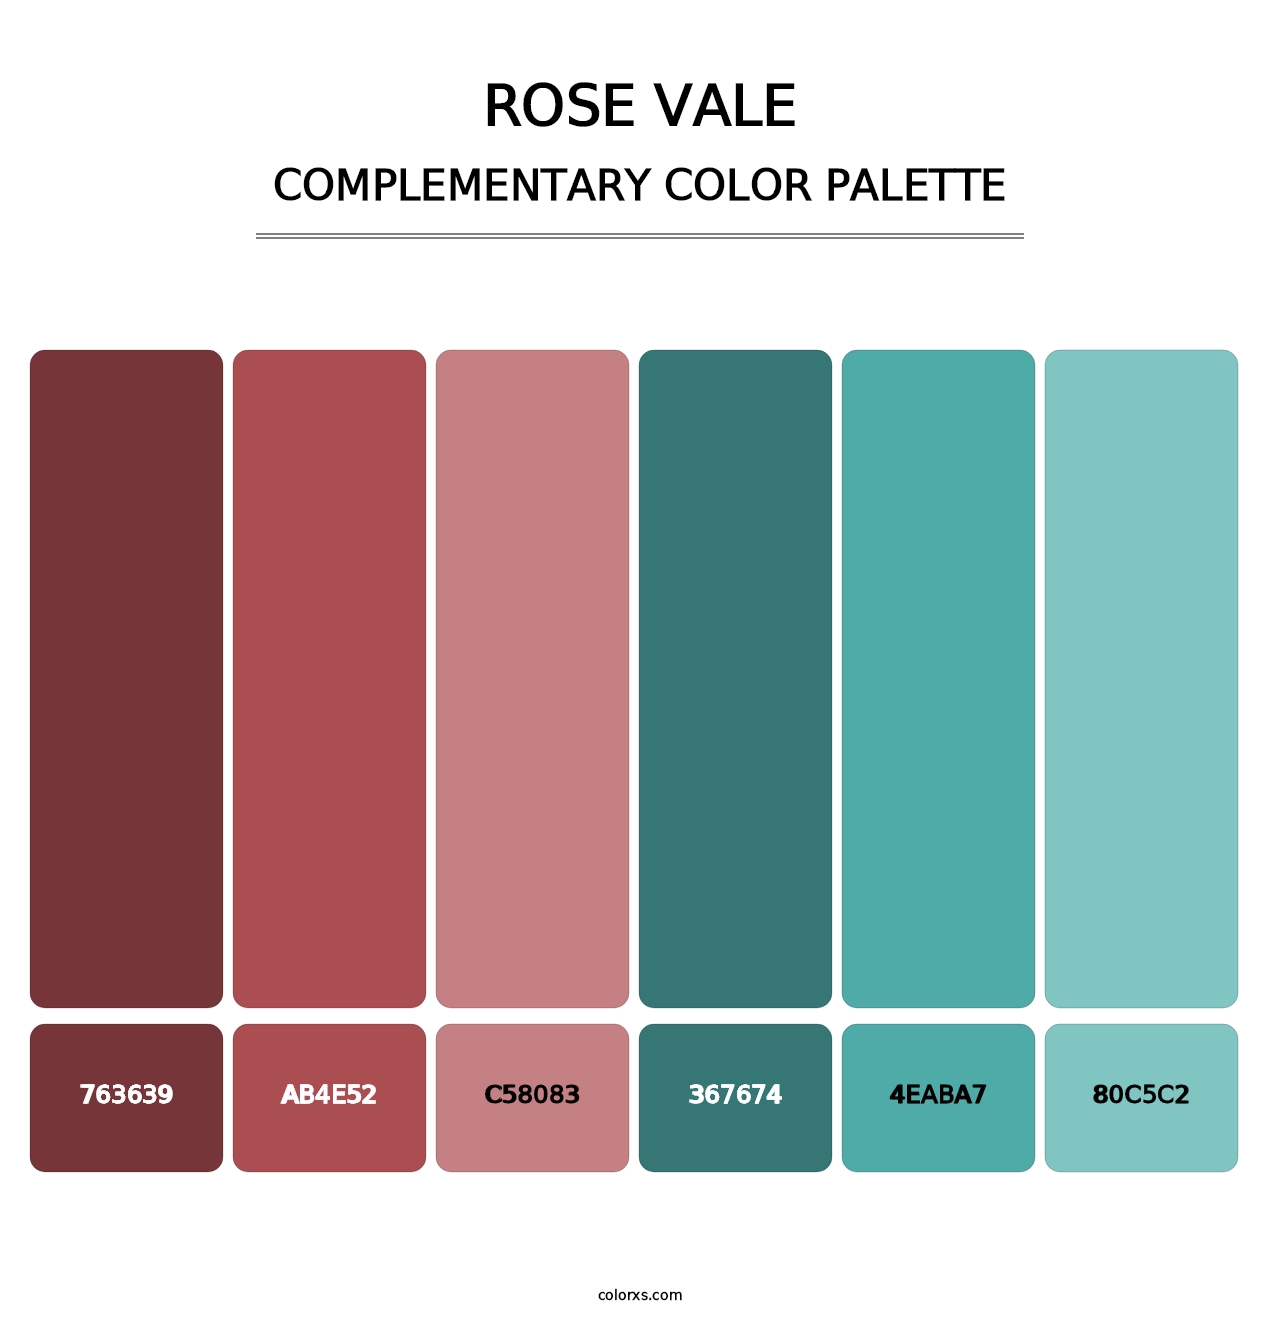 Rose Vale - Complementary Color Palette